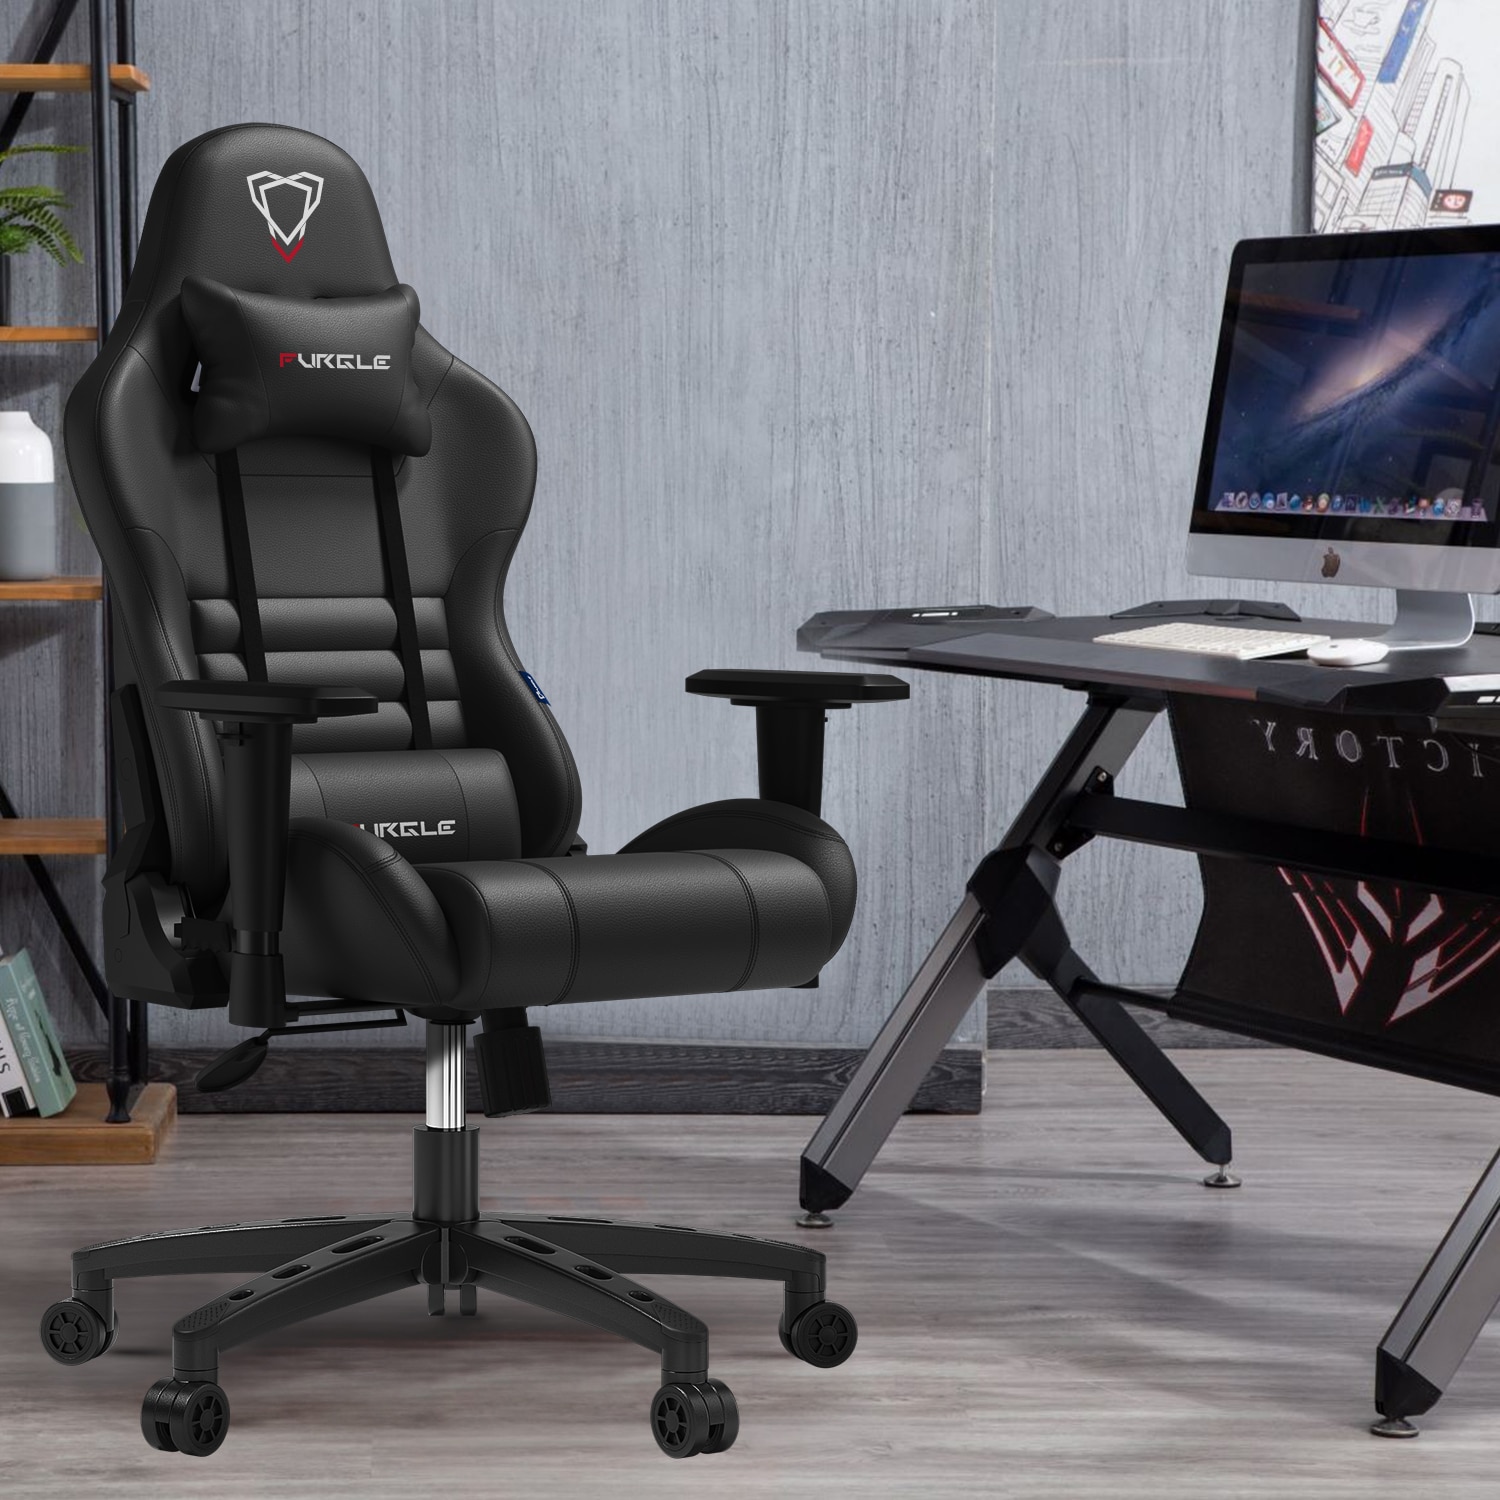 shop with crypto buy Furgle Office Chair Swivel Gaming Chair Computer Chair with High Back Game Chairs PU Leather Seat for Office Chair Furniture pay with bitcoin